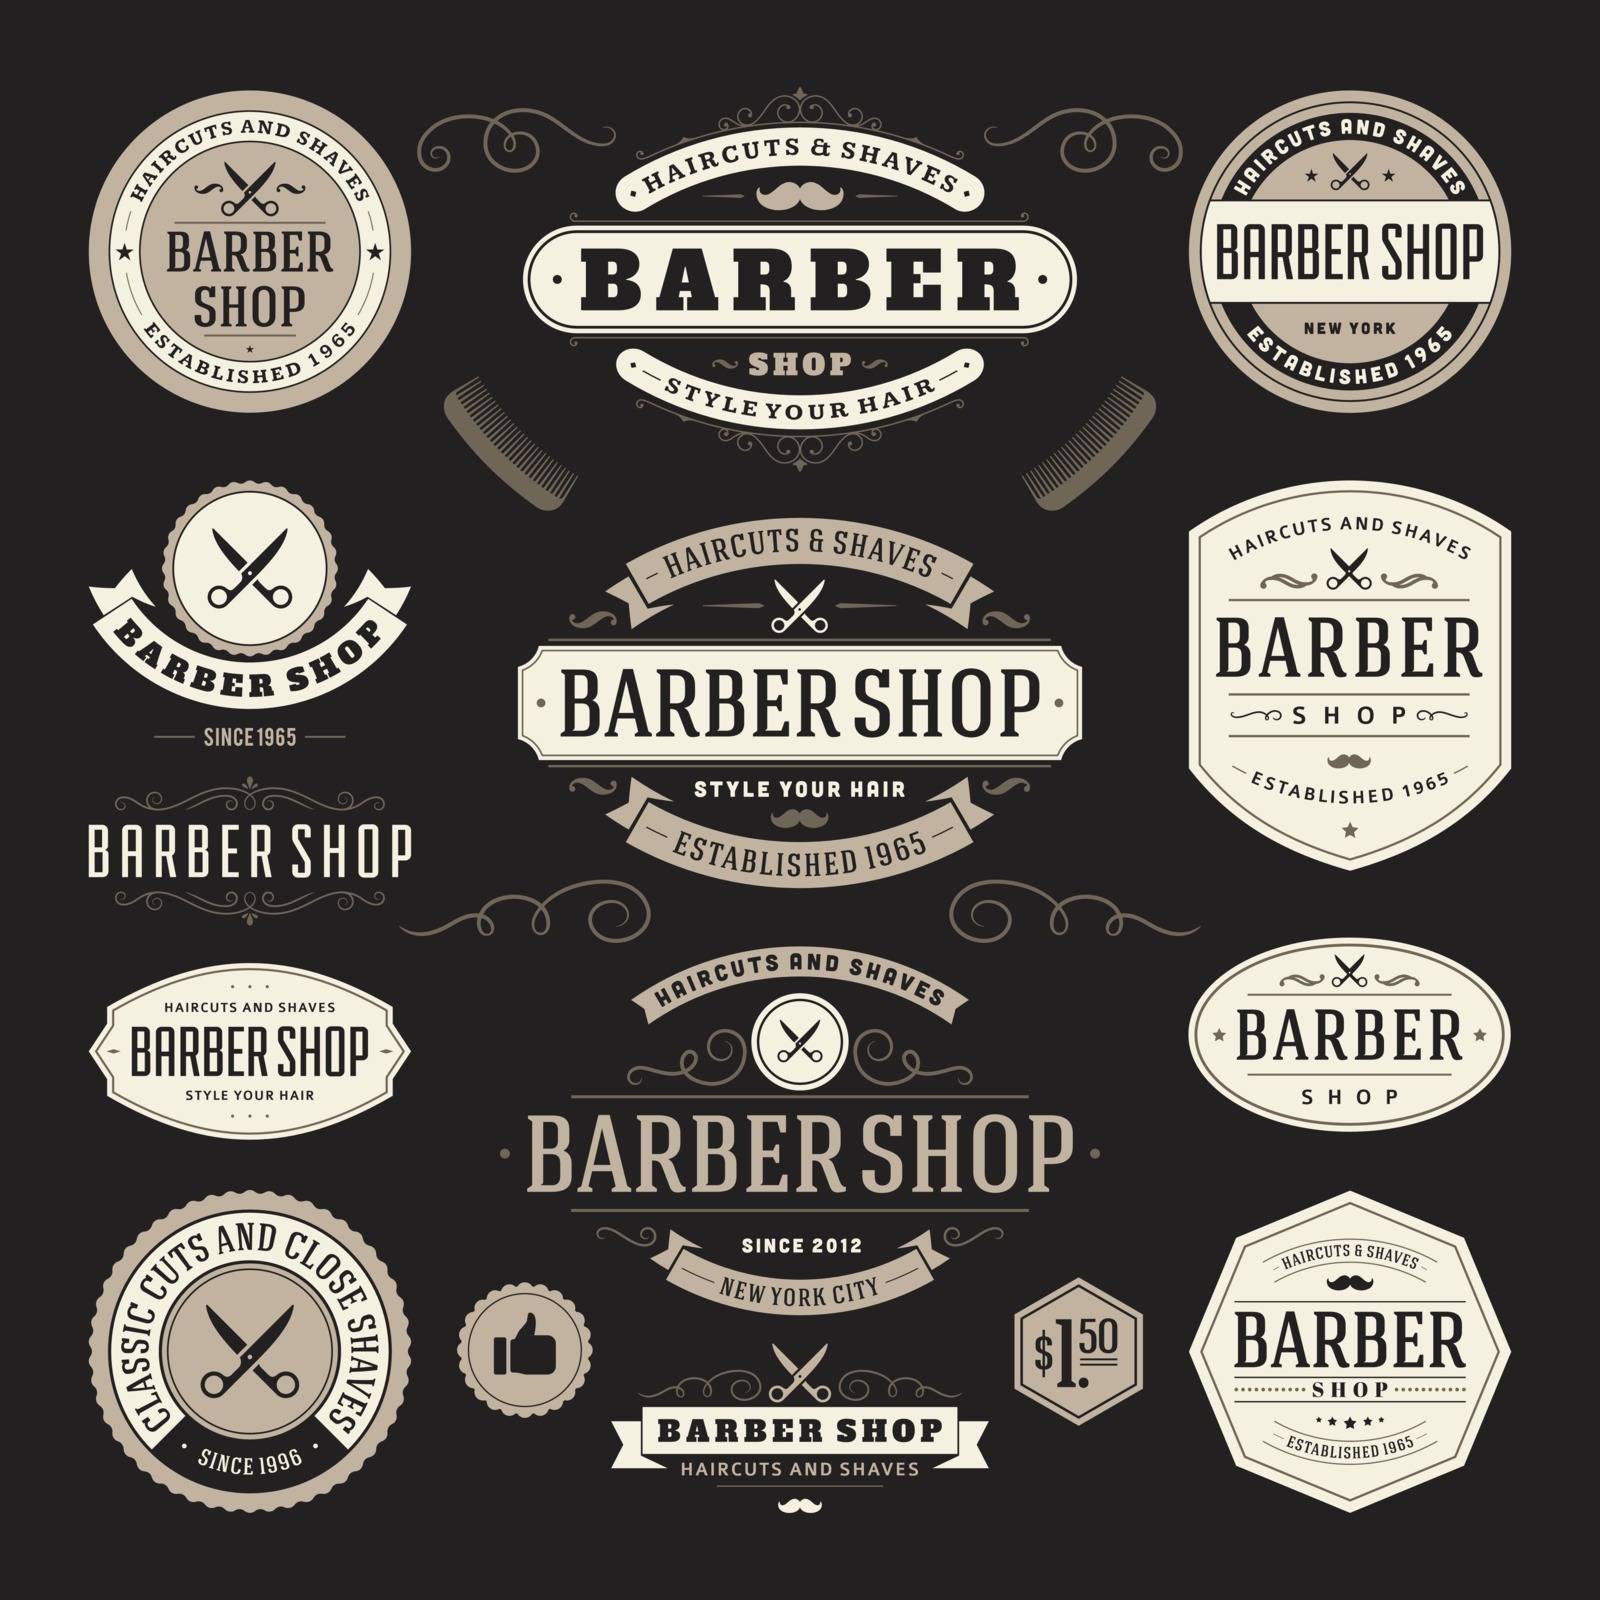 Barber shop icons by kartyl